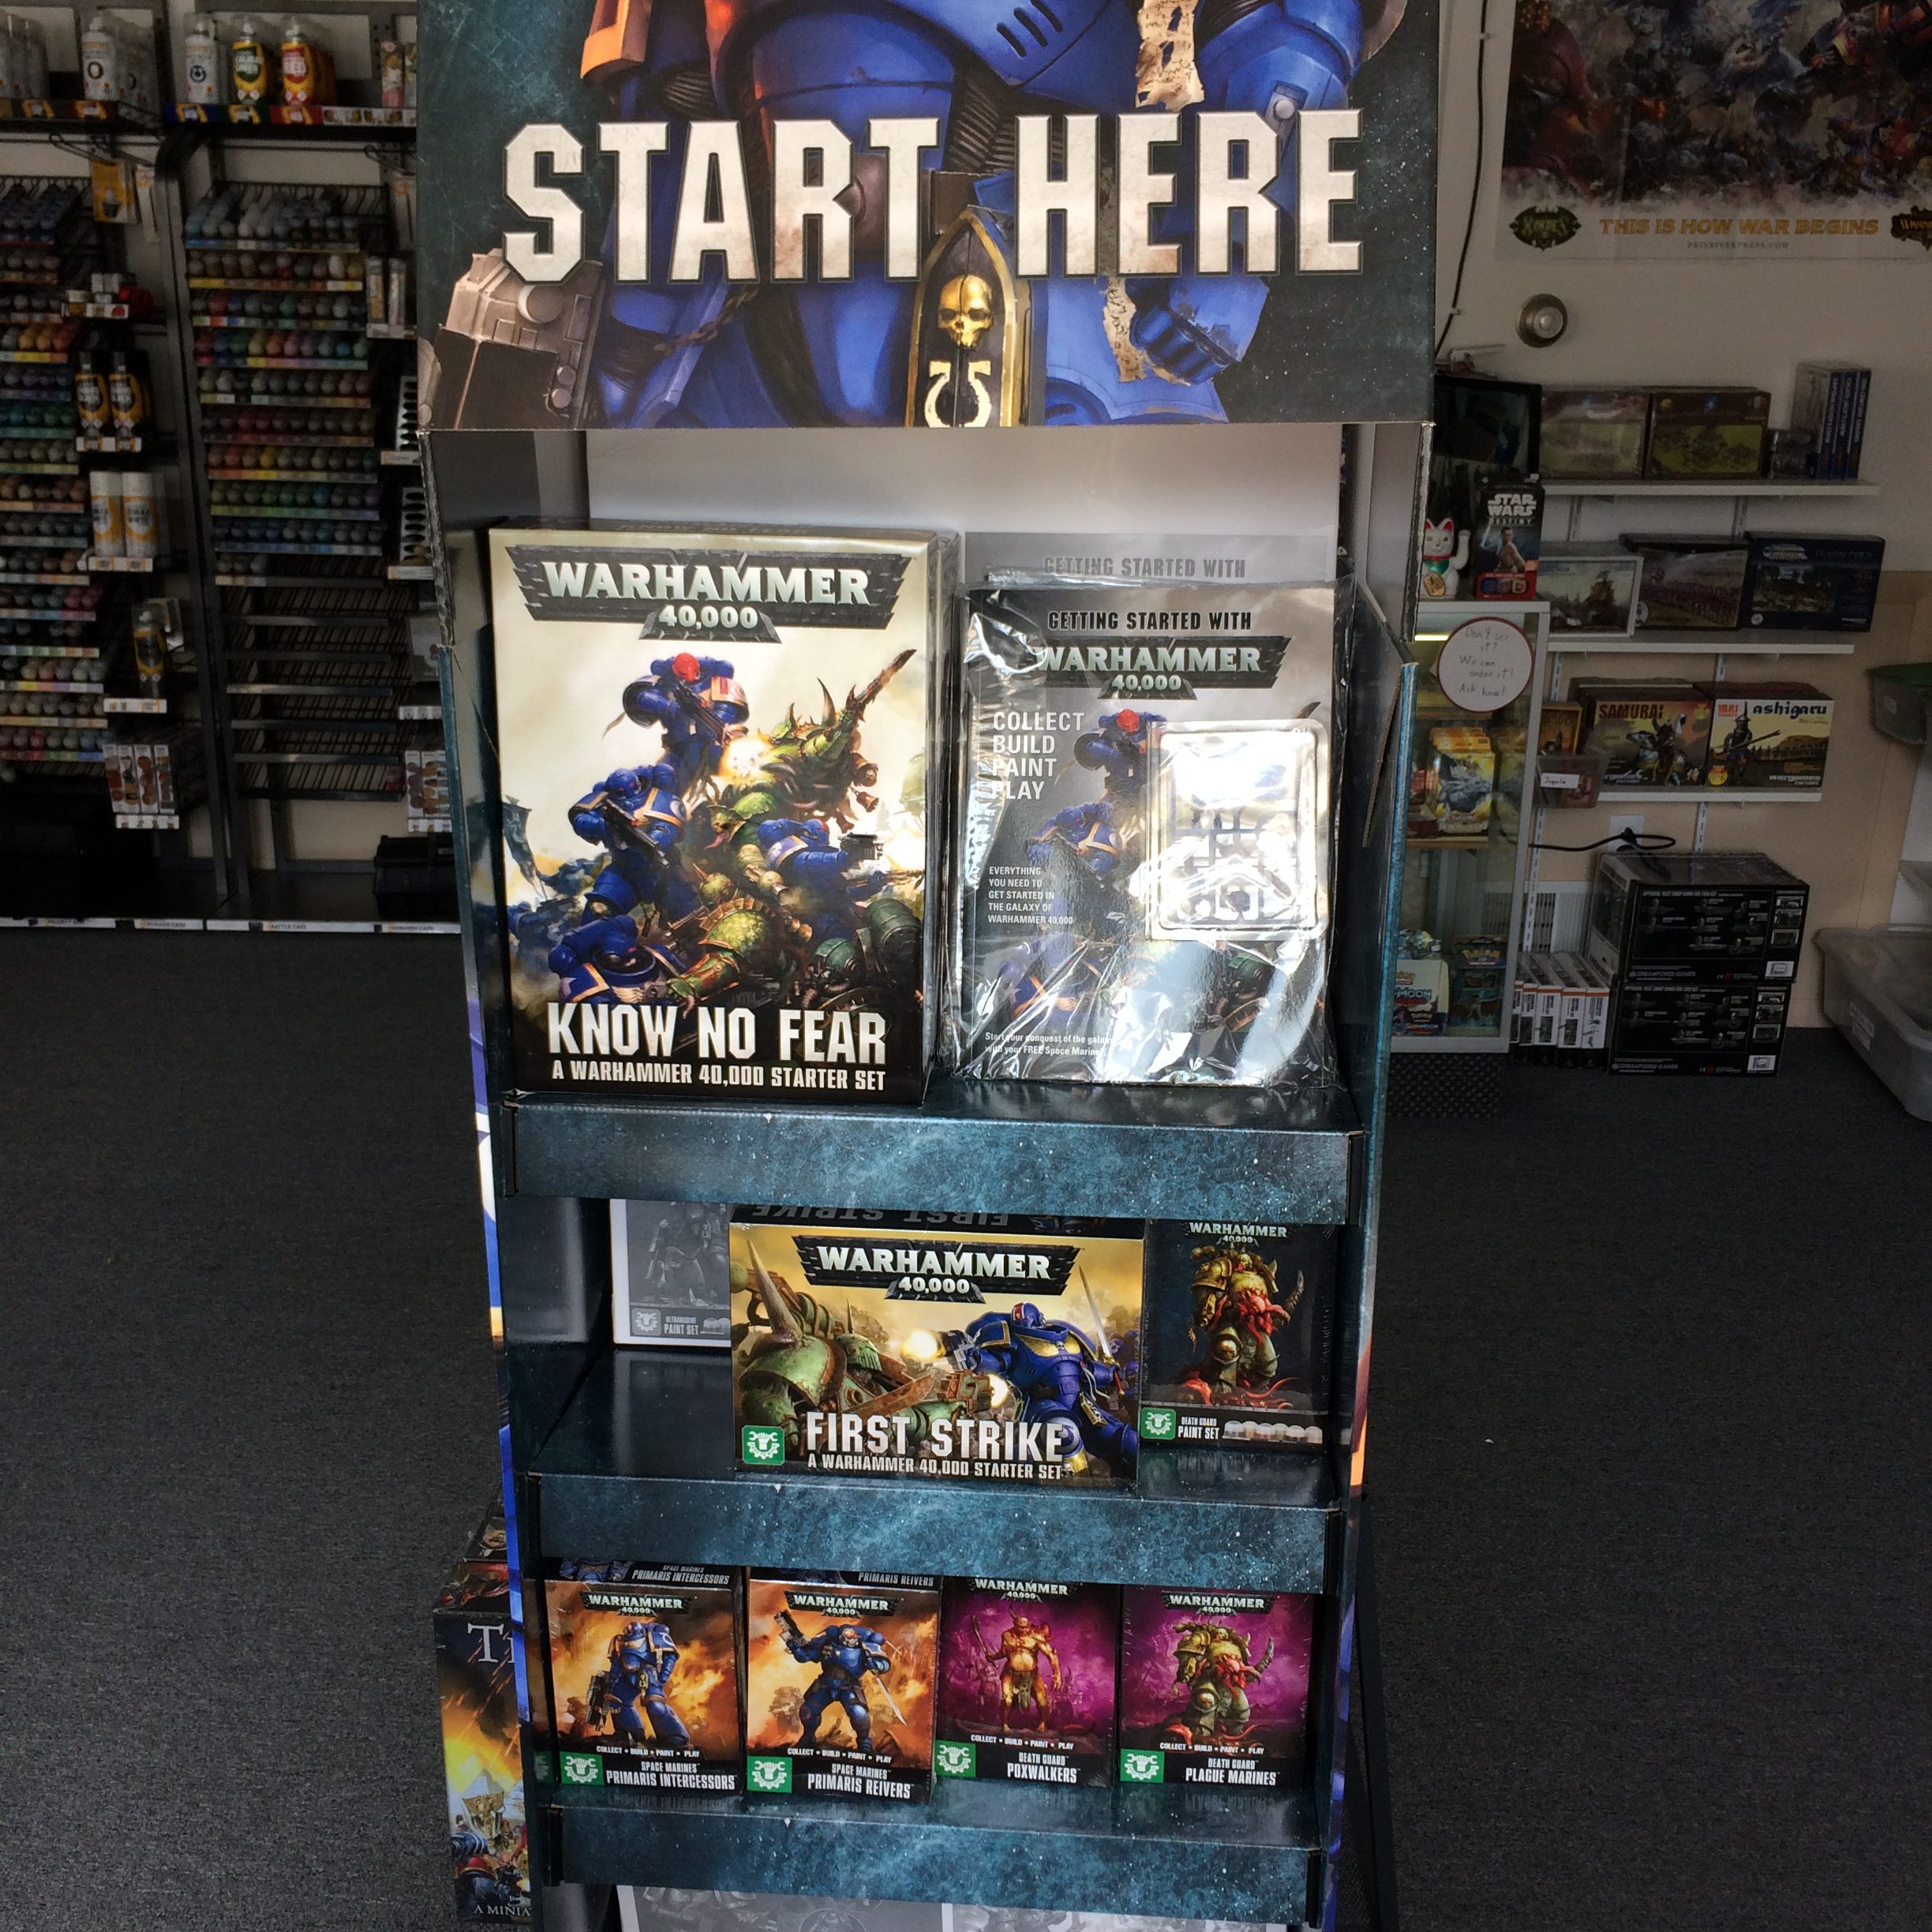 Get You Warhammer 40,000 Adventure Started Today!